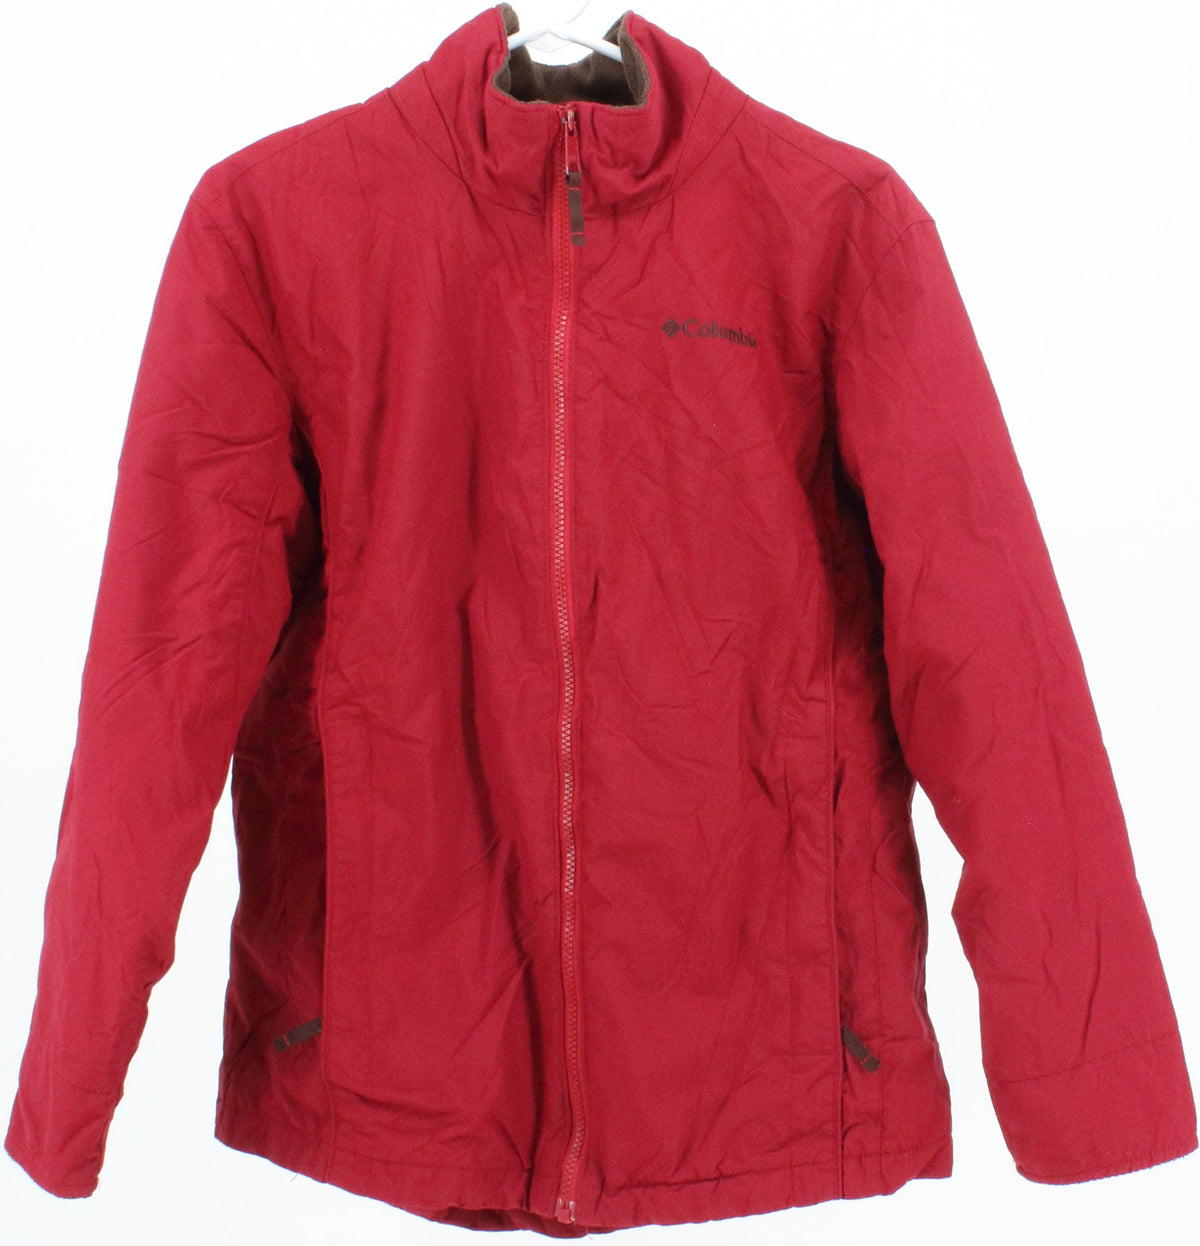 Columbia Women's Red Jacket With Brown Fleece Lining